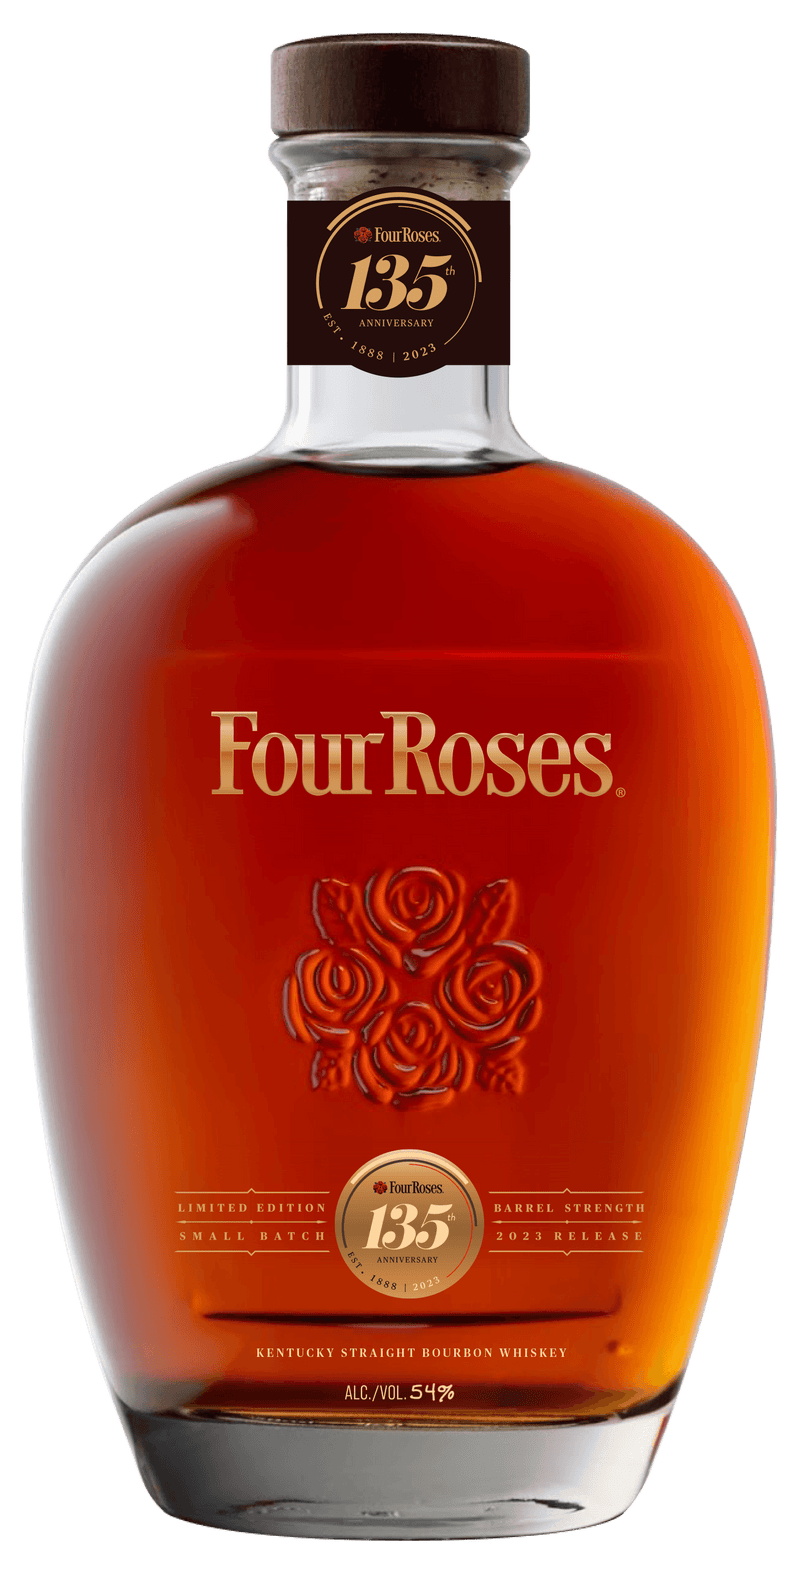 2023 Four Roses 135TH Anniversary Limited Edition Small Batch